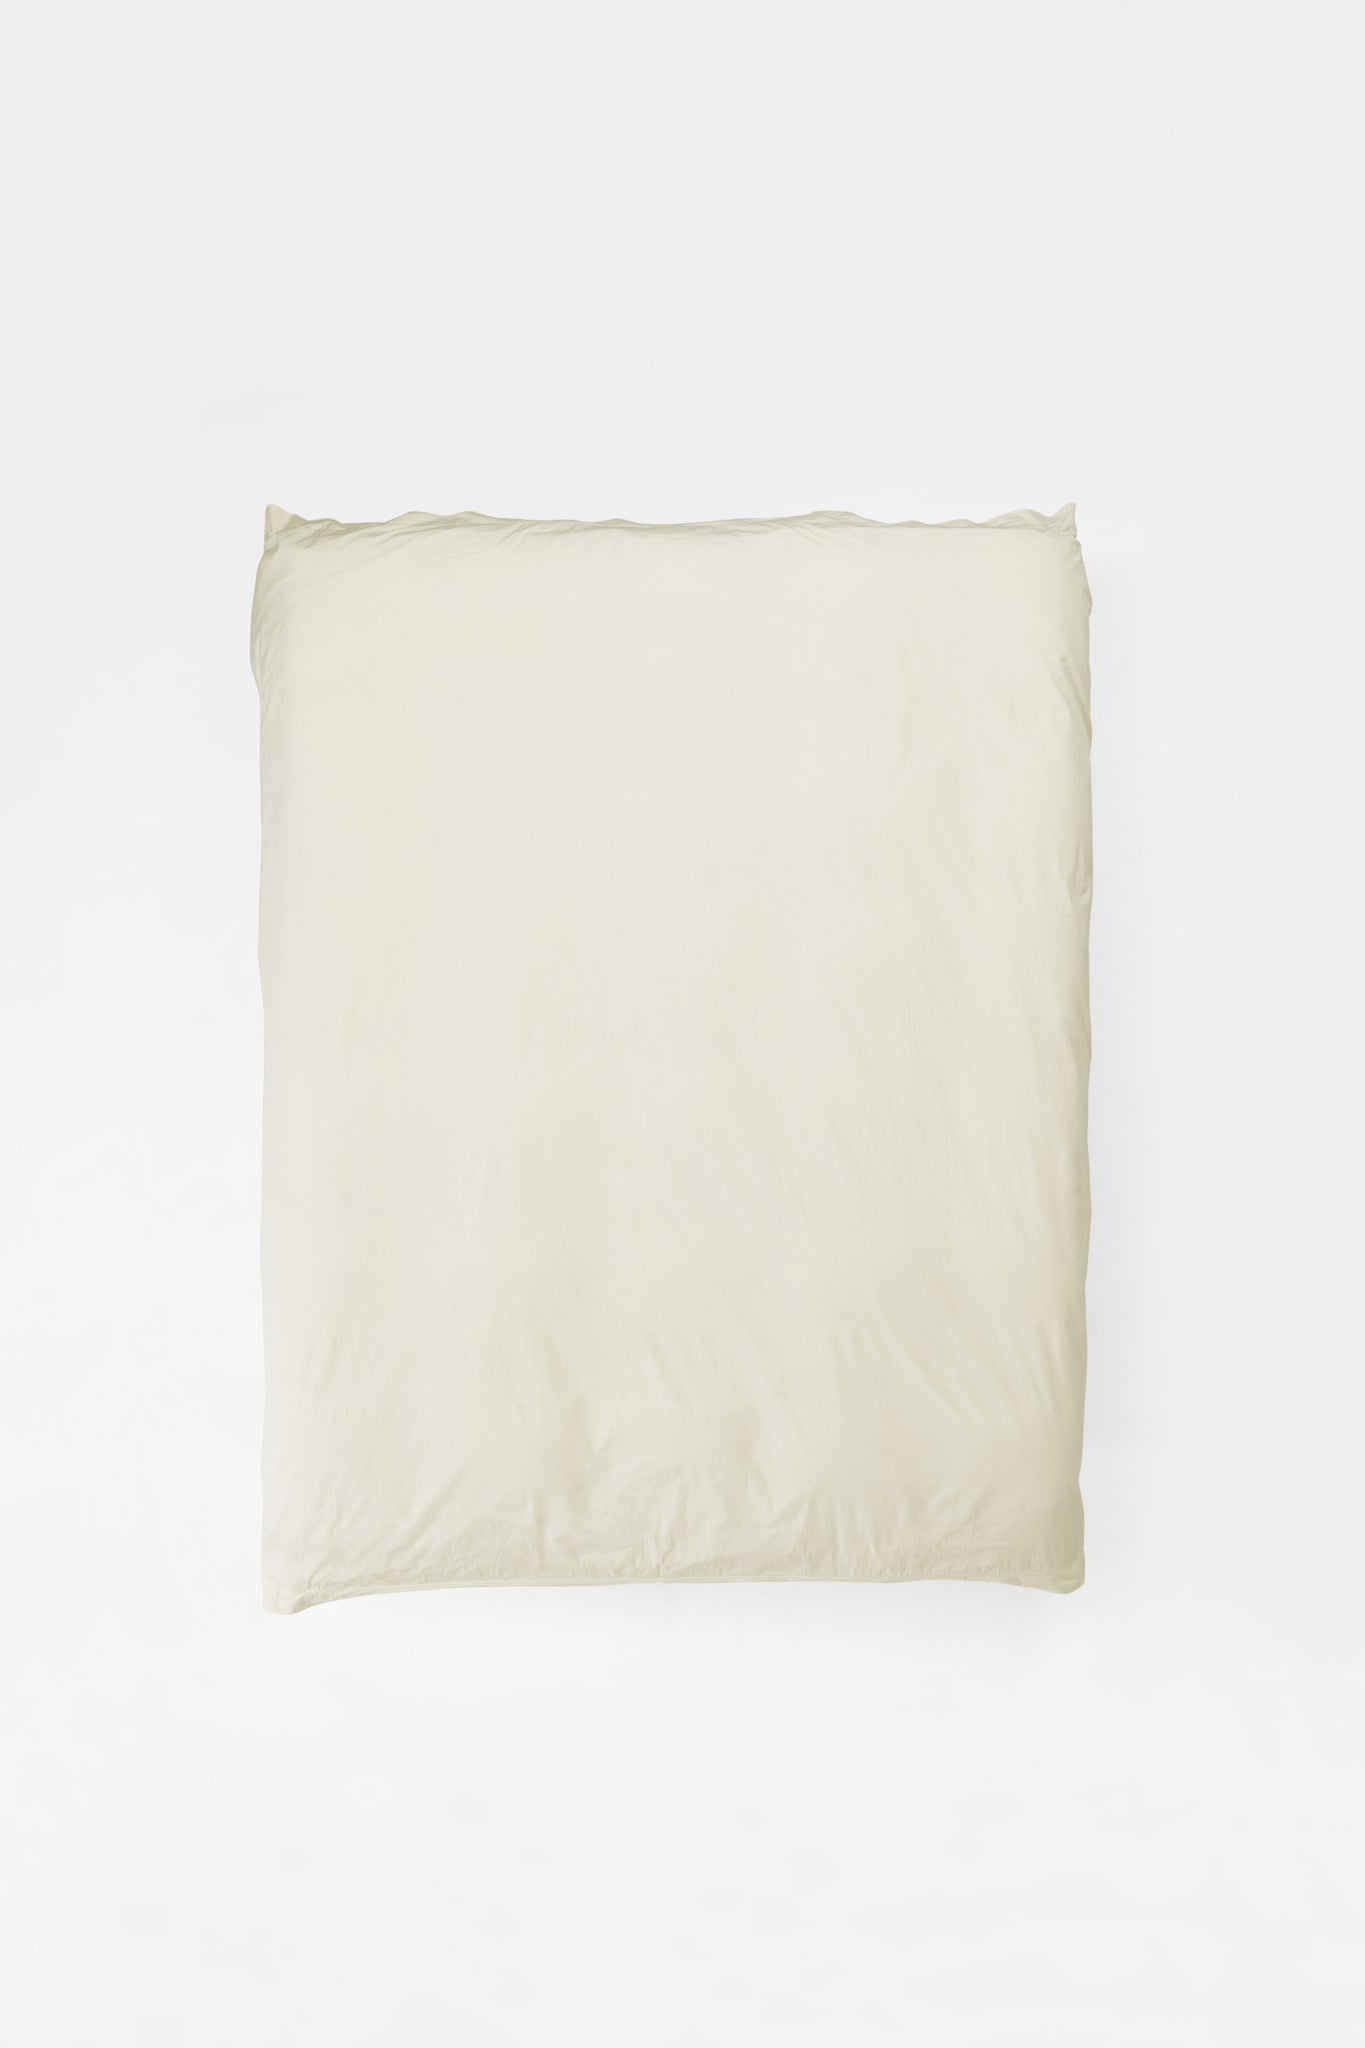 Duvet Cover in Canvas